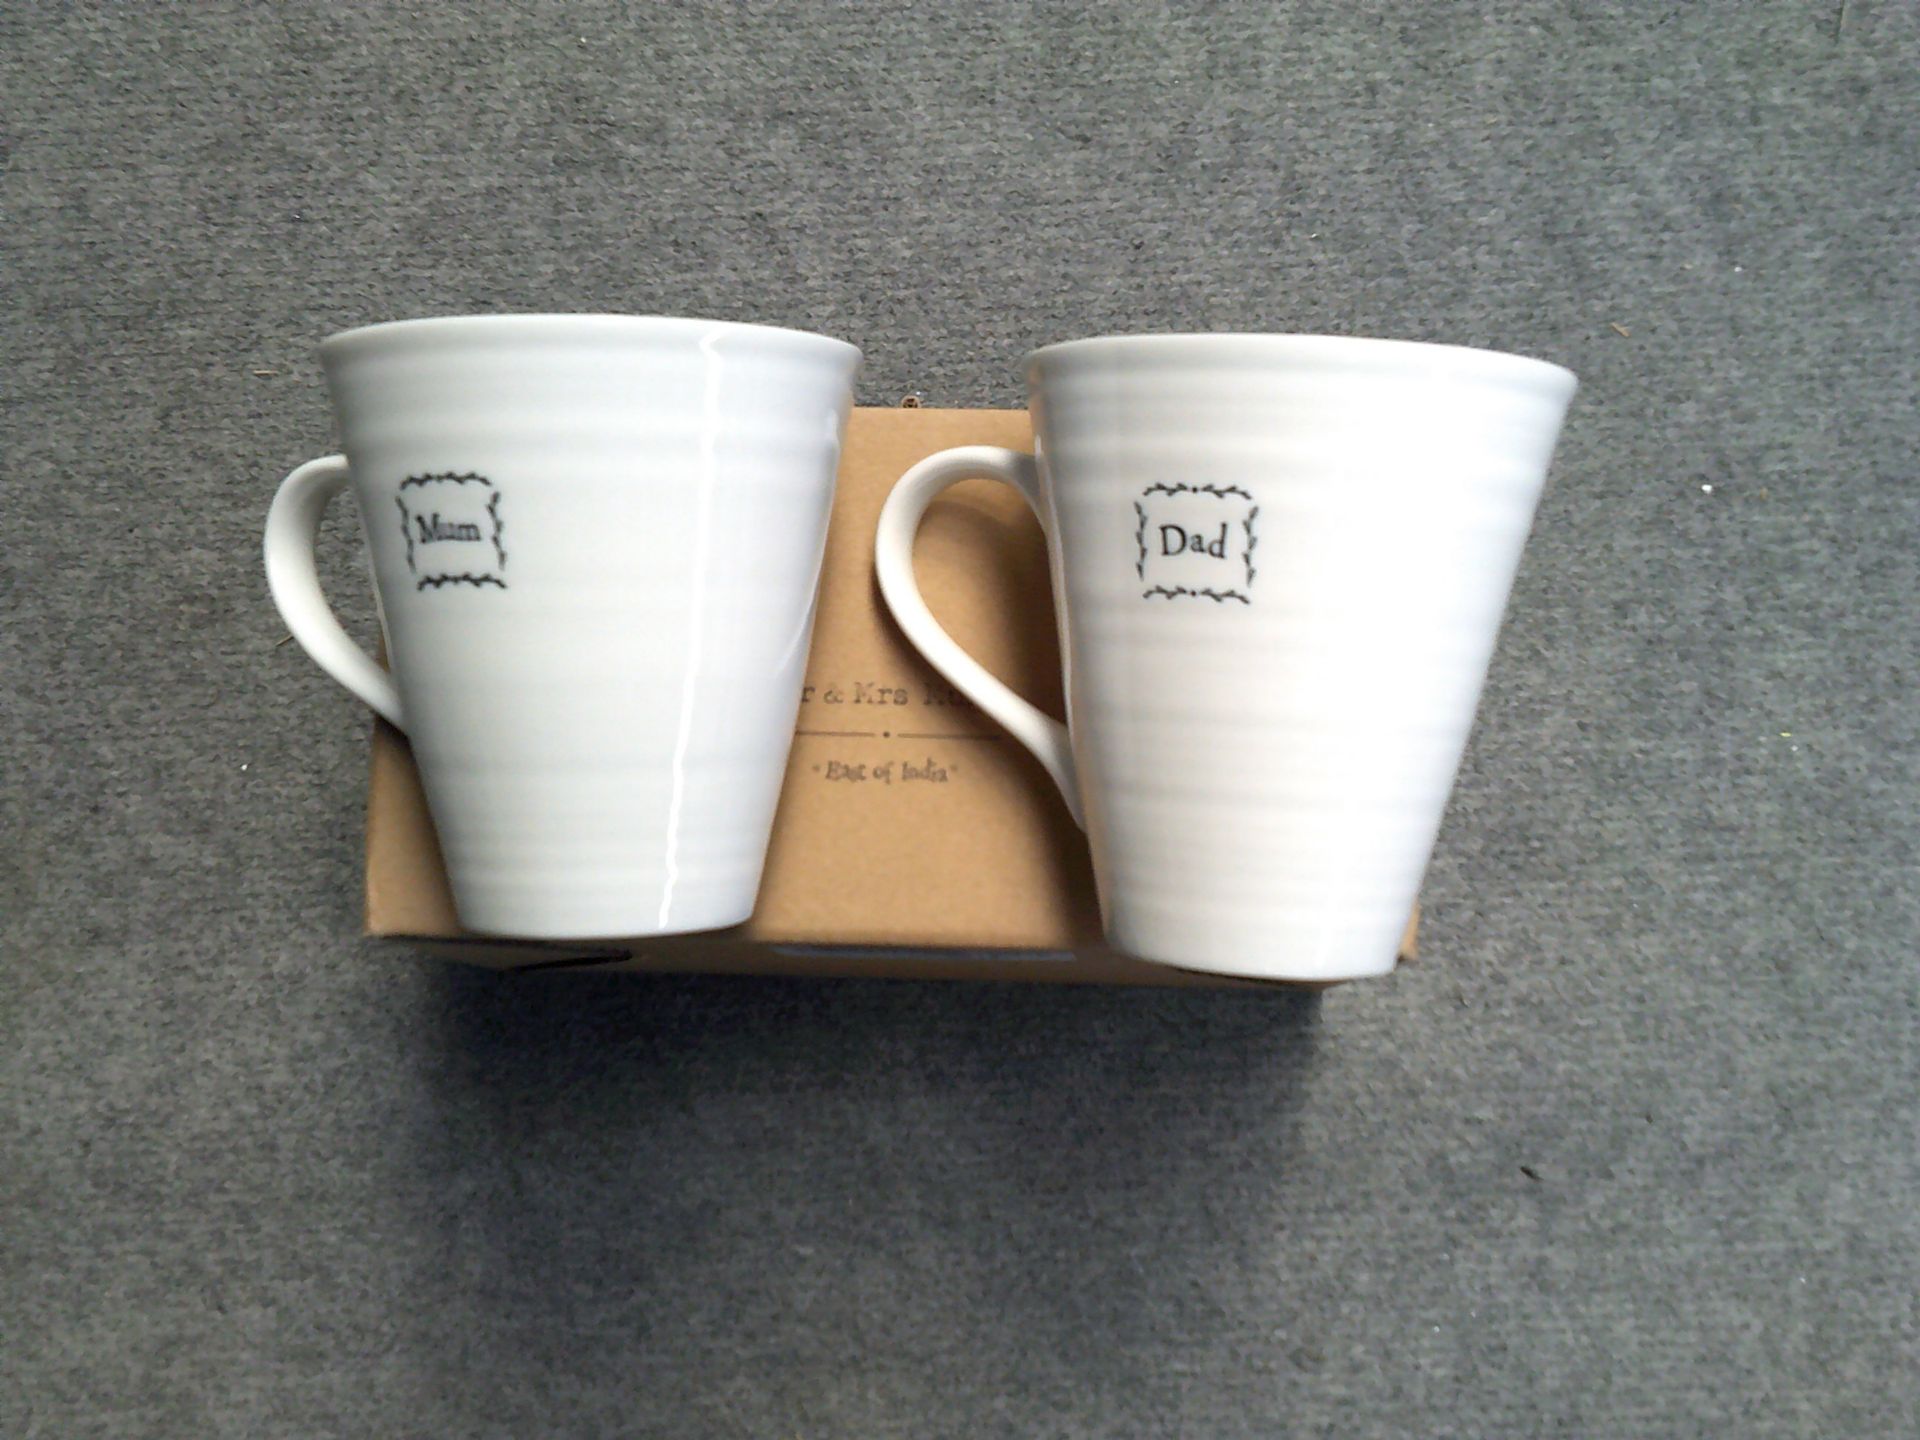 Mr&mrs mugs (Delivery Band A)